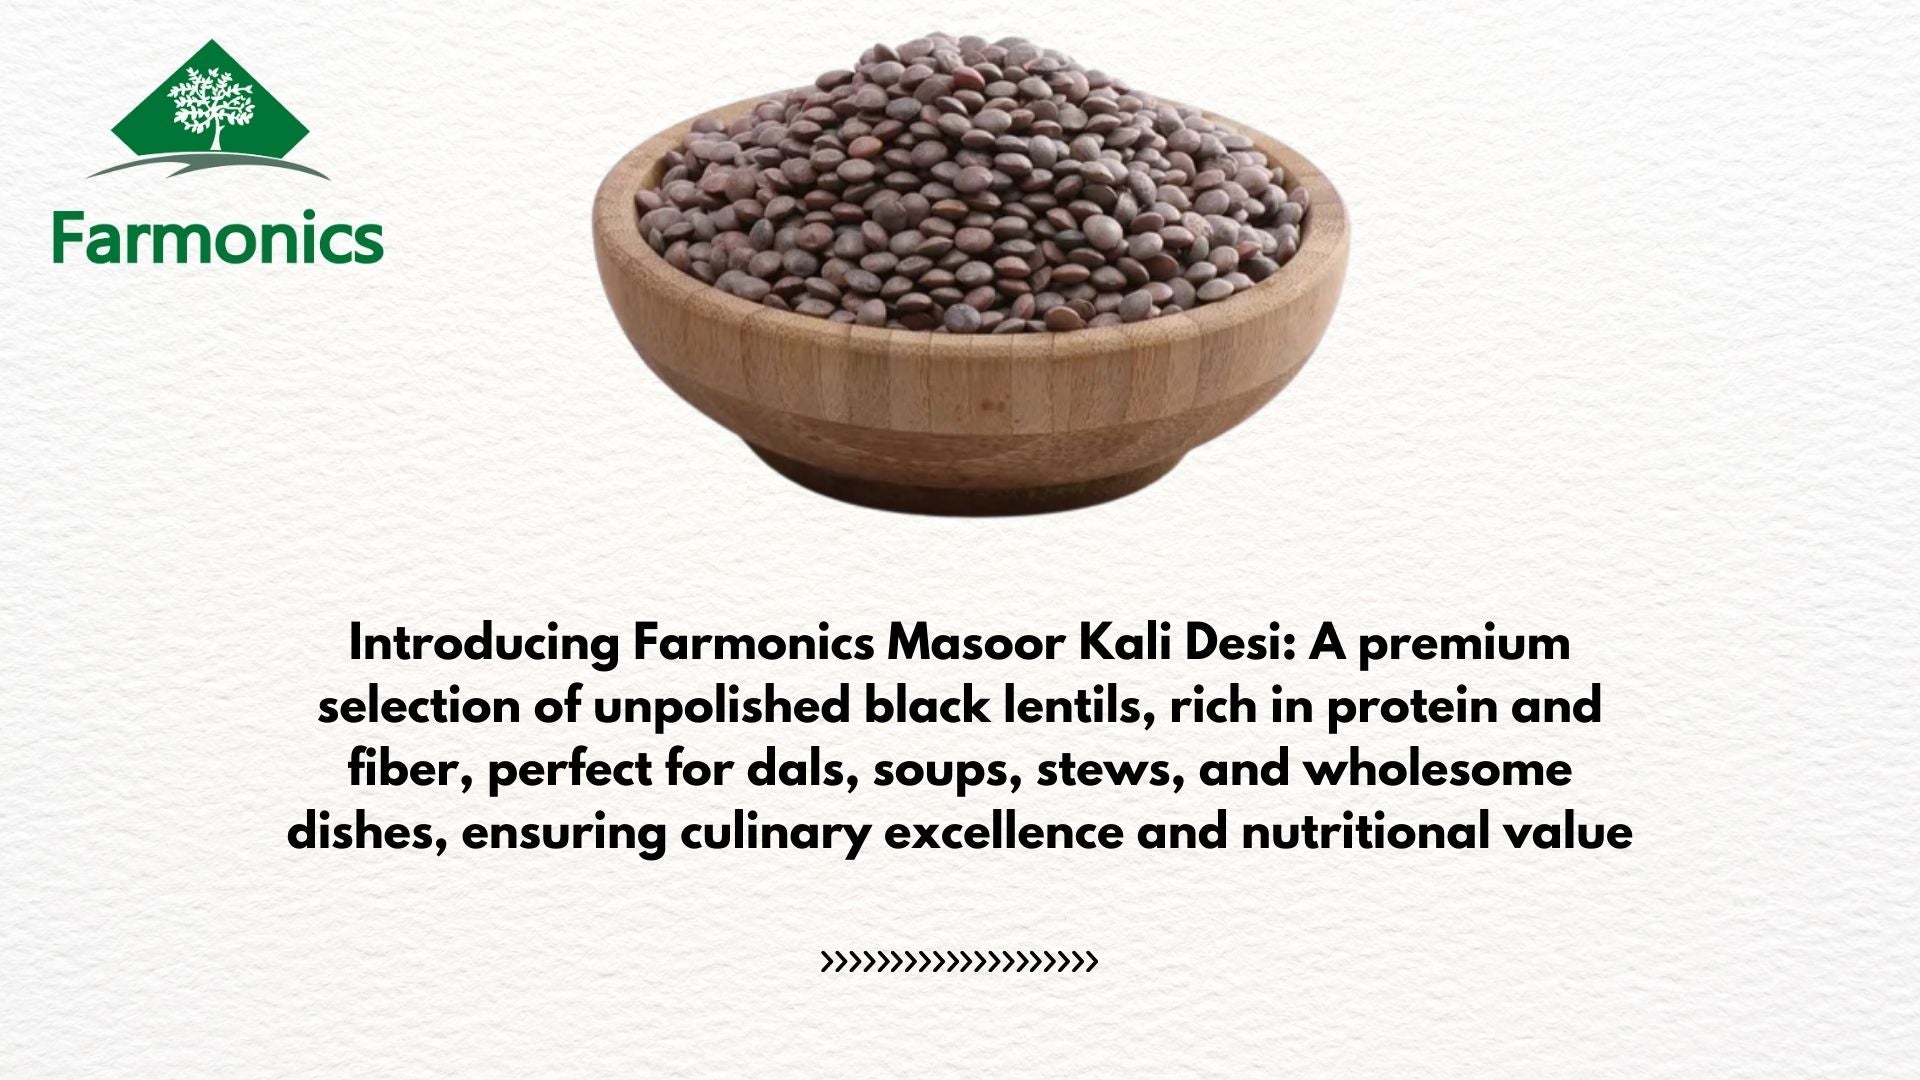 Here are some of the information about farmonics premioum quality   kali masoor